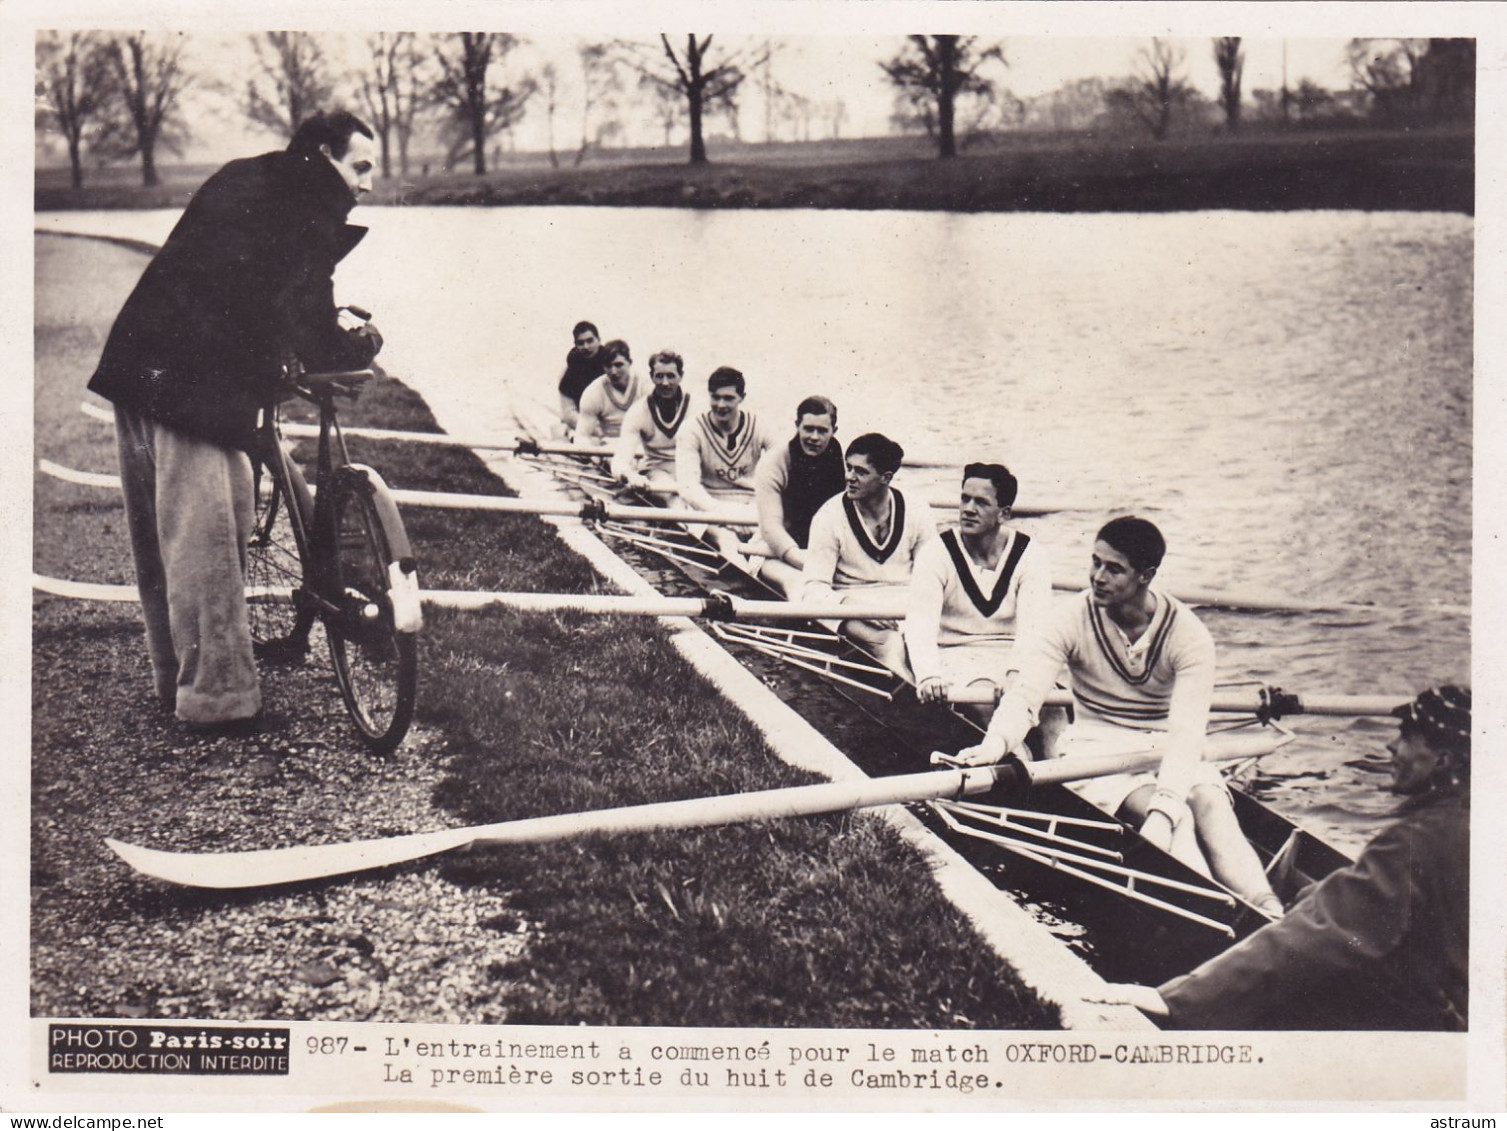 Cpa / Photo - Ang - Cambridge - Sport Aviron - 1st Outing Training For The Cambridge Team - Aviron